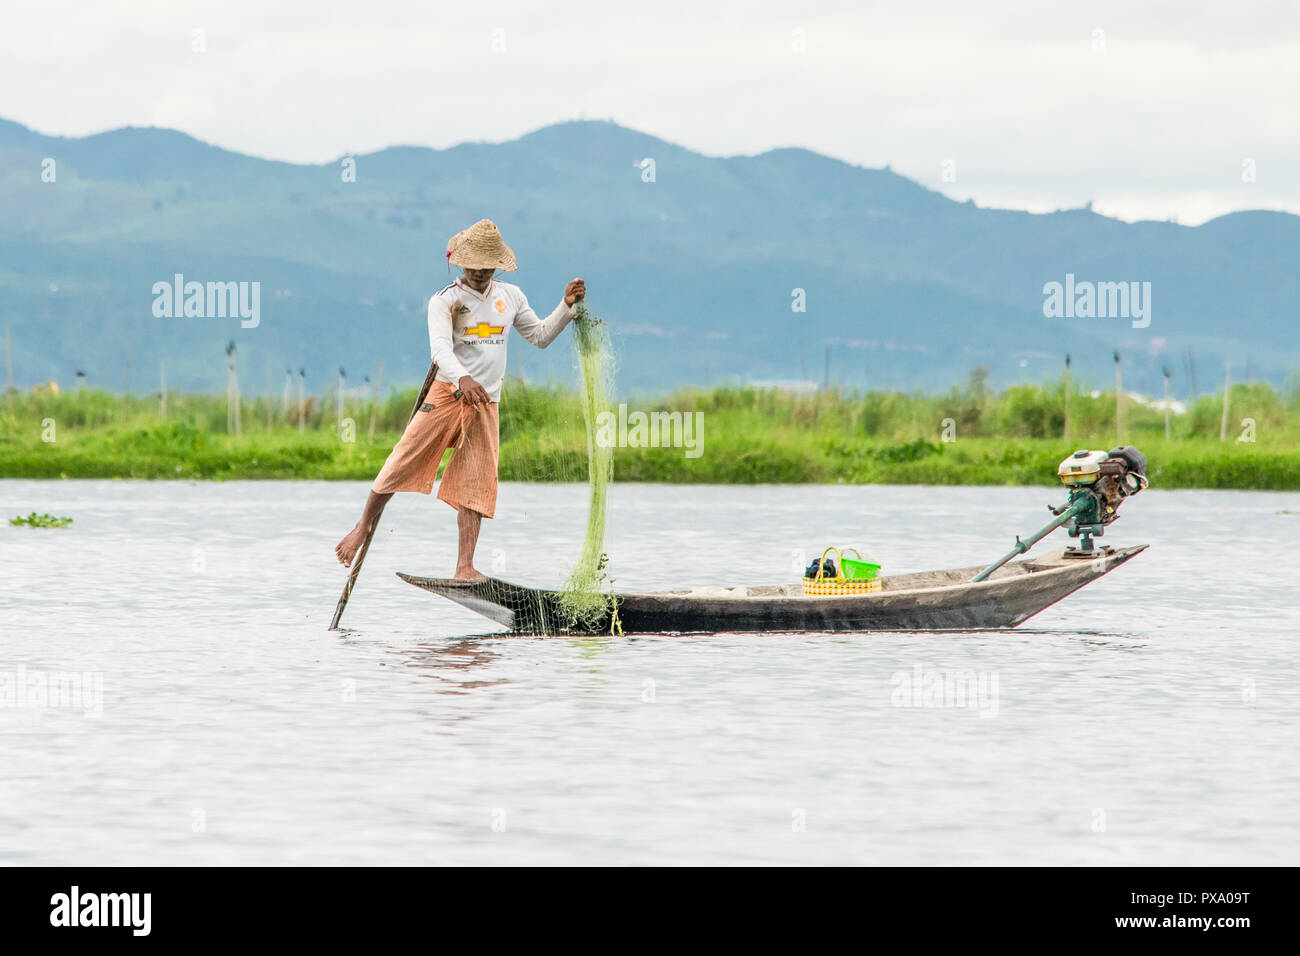 Travel: local young Burmese fisherman wearing Manchester United shirt, balancing and steering boat with his foot in Inle Lake, Burma, Myanmar, Asia Stock Photo